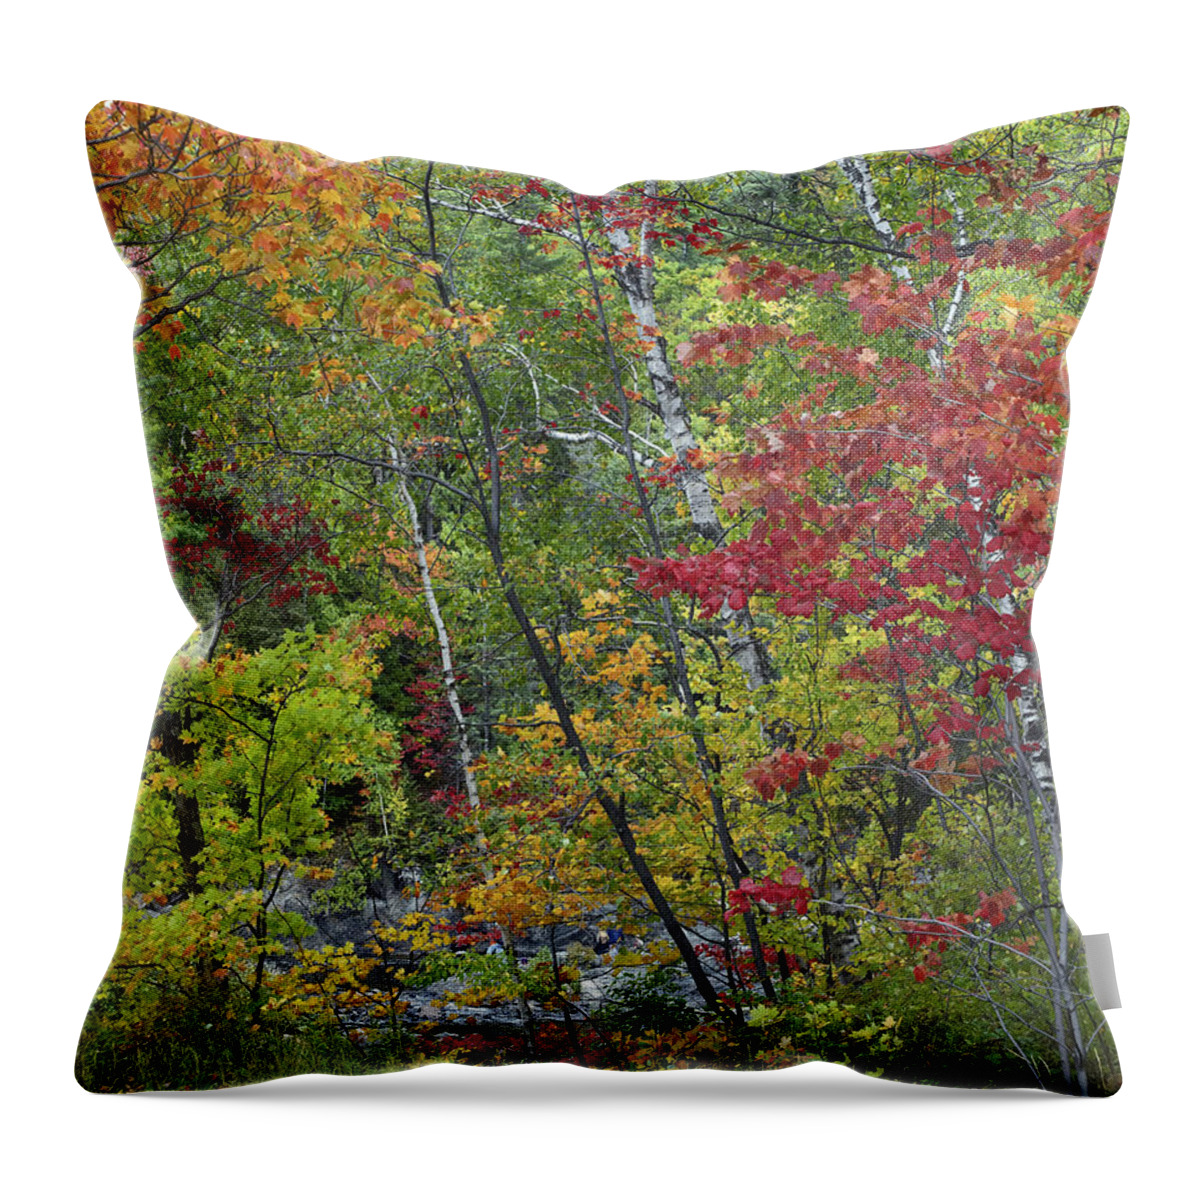 Feb0514 Throw Pillow featuring the photograph Autumn Foliage Chippewa River Ontario by Tim Fitzharris